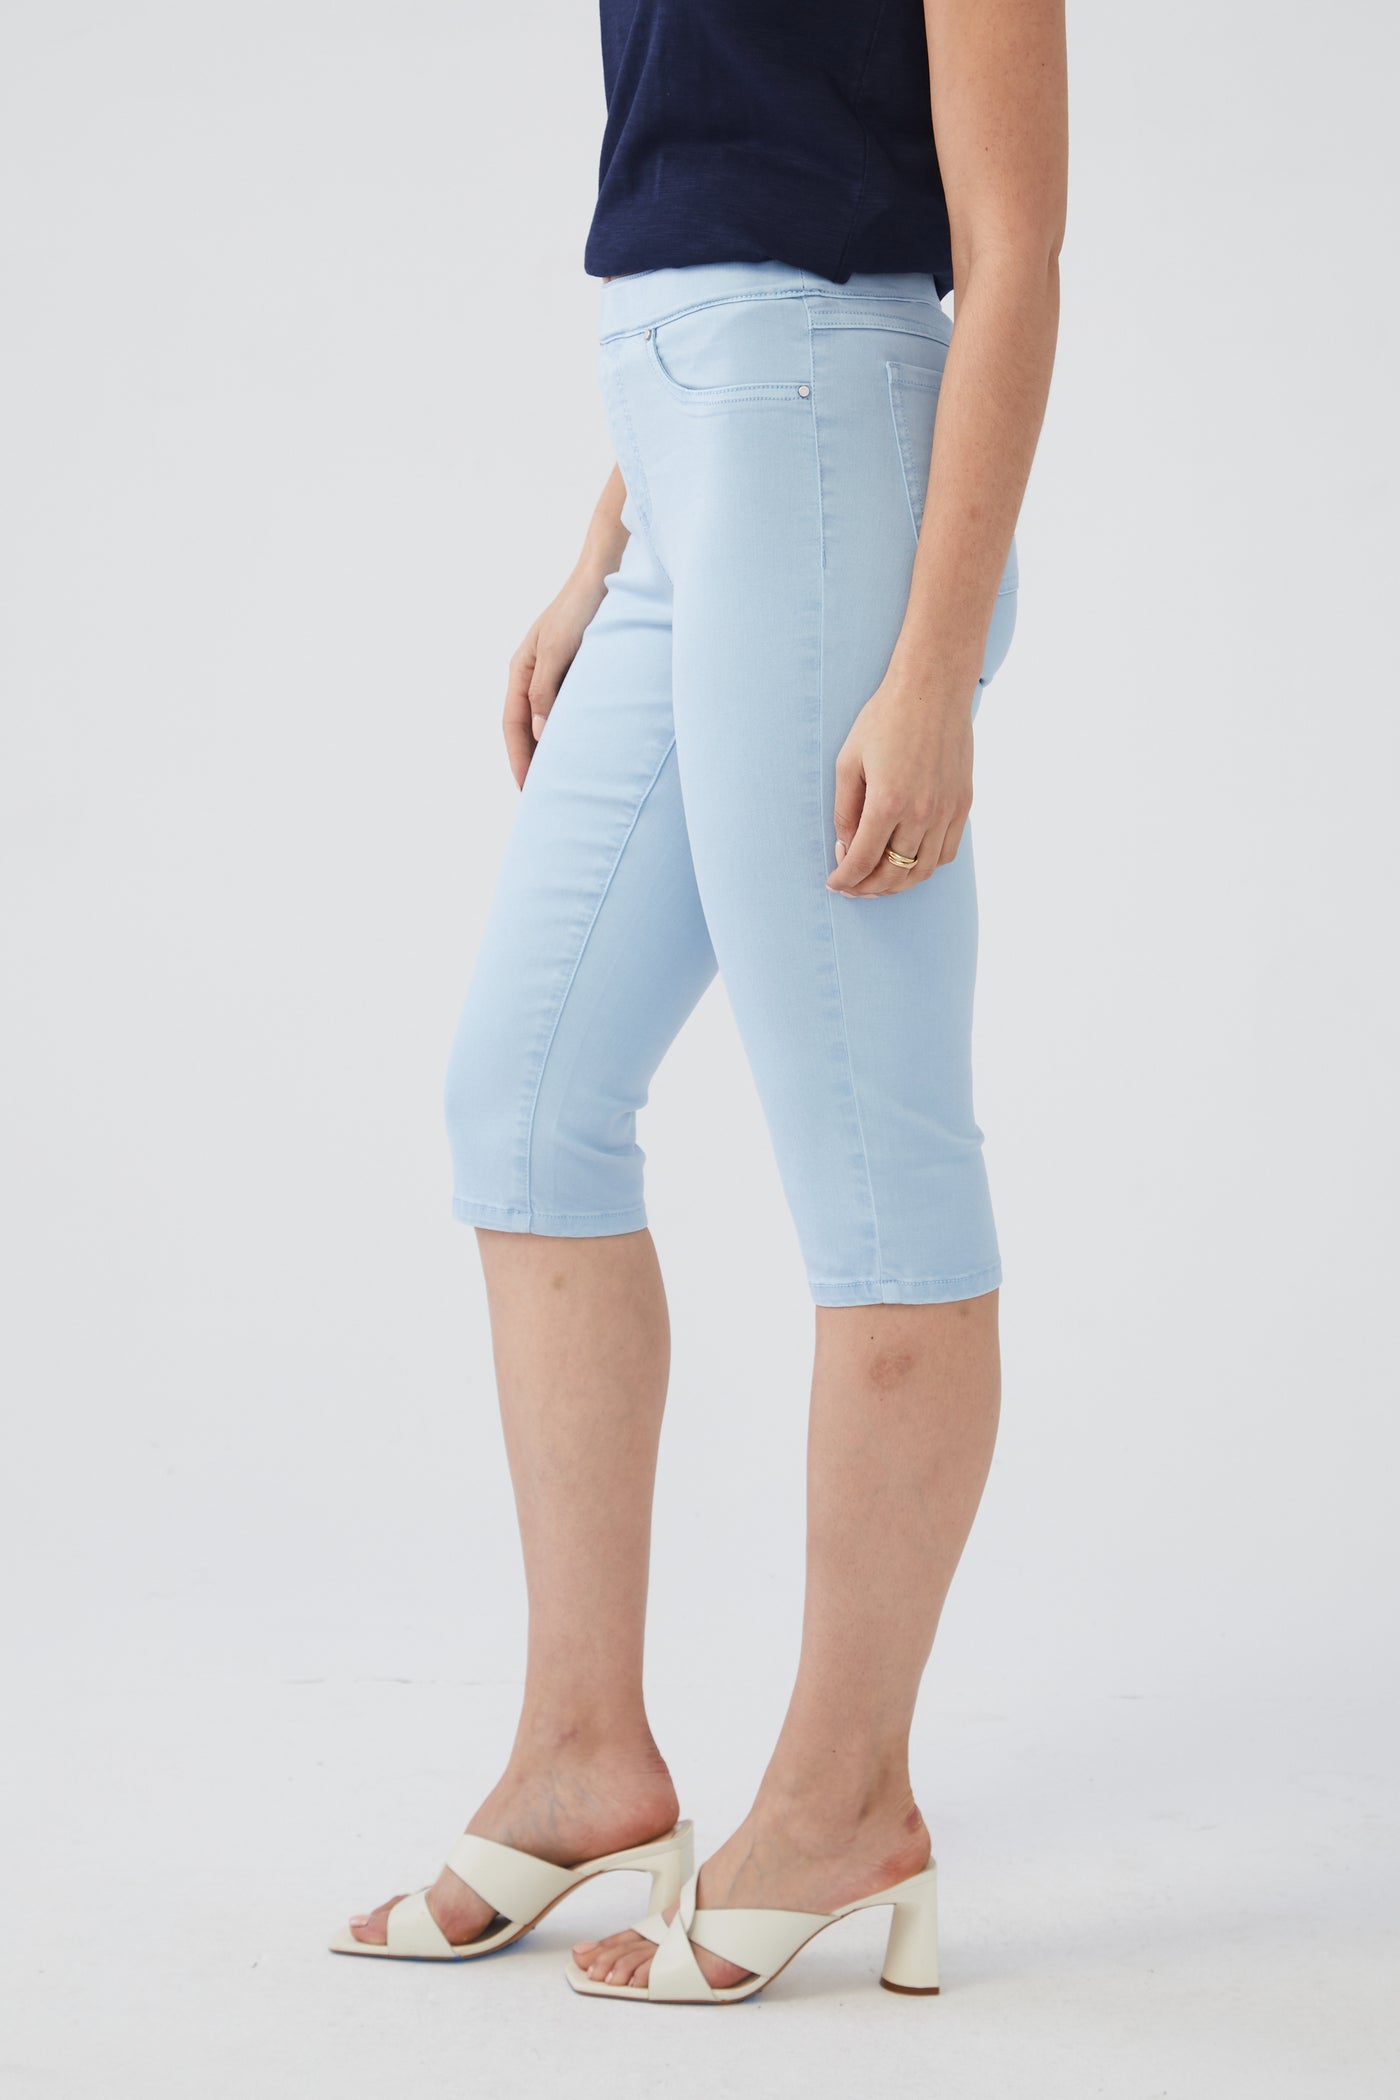 Pull-On Capri Pedal Pusher Style 2067511, 17" French Dressing Jeans